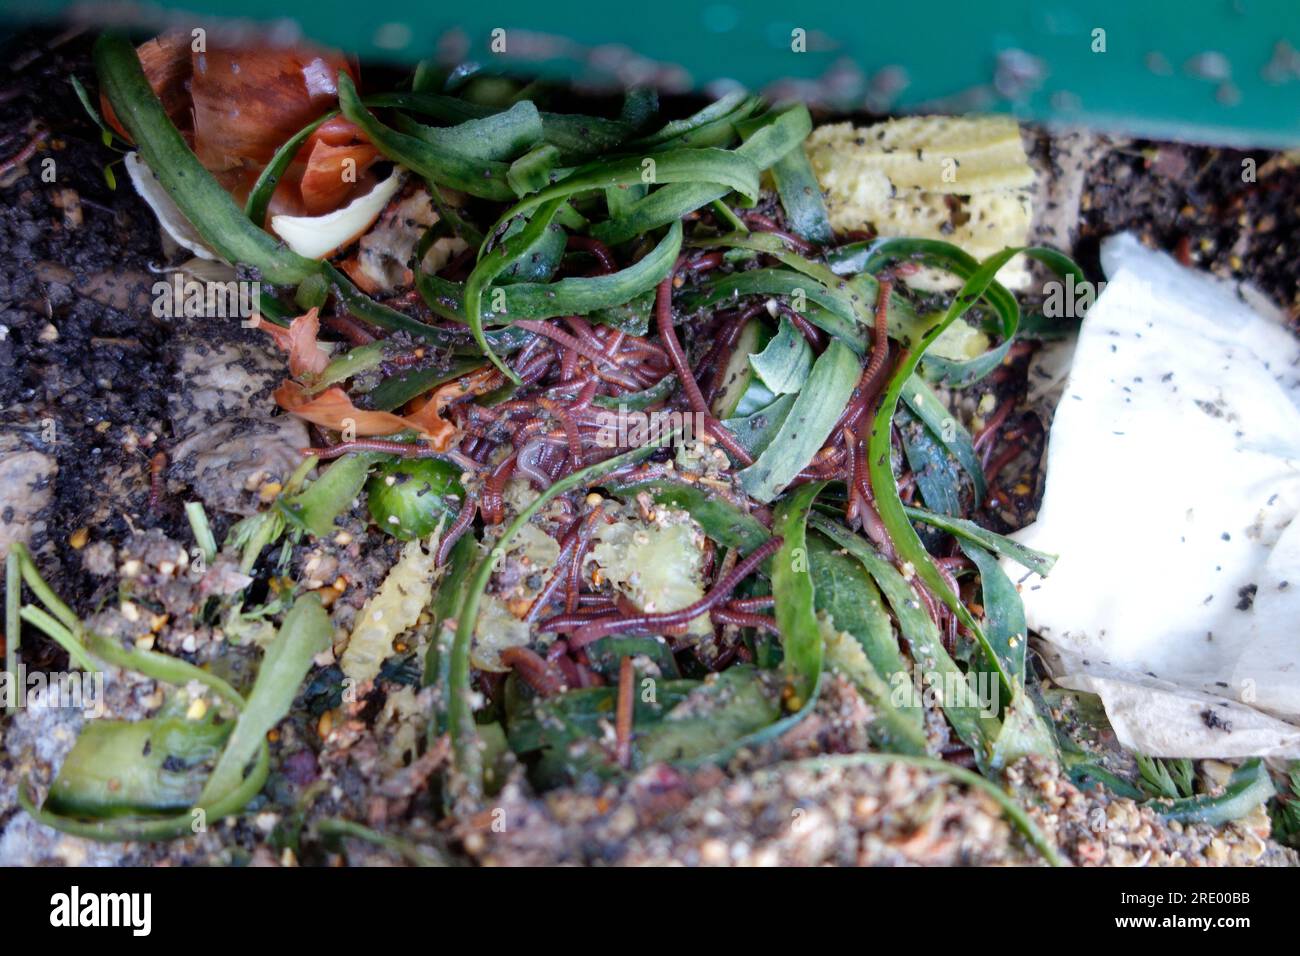 Vermicompost - Red wiggler compost worms fed with vegetables and kitchen waste Stock Photo